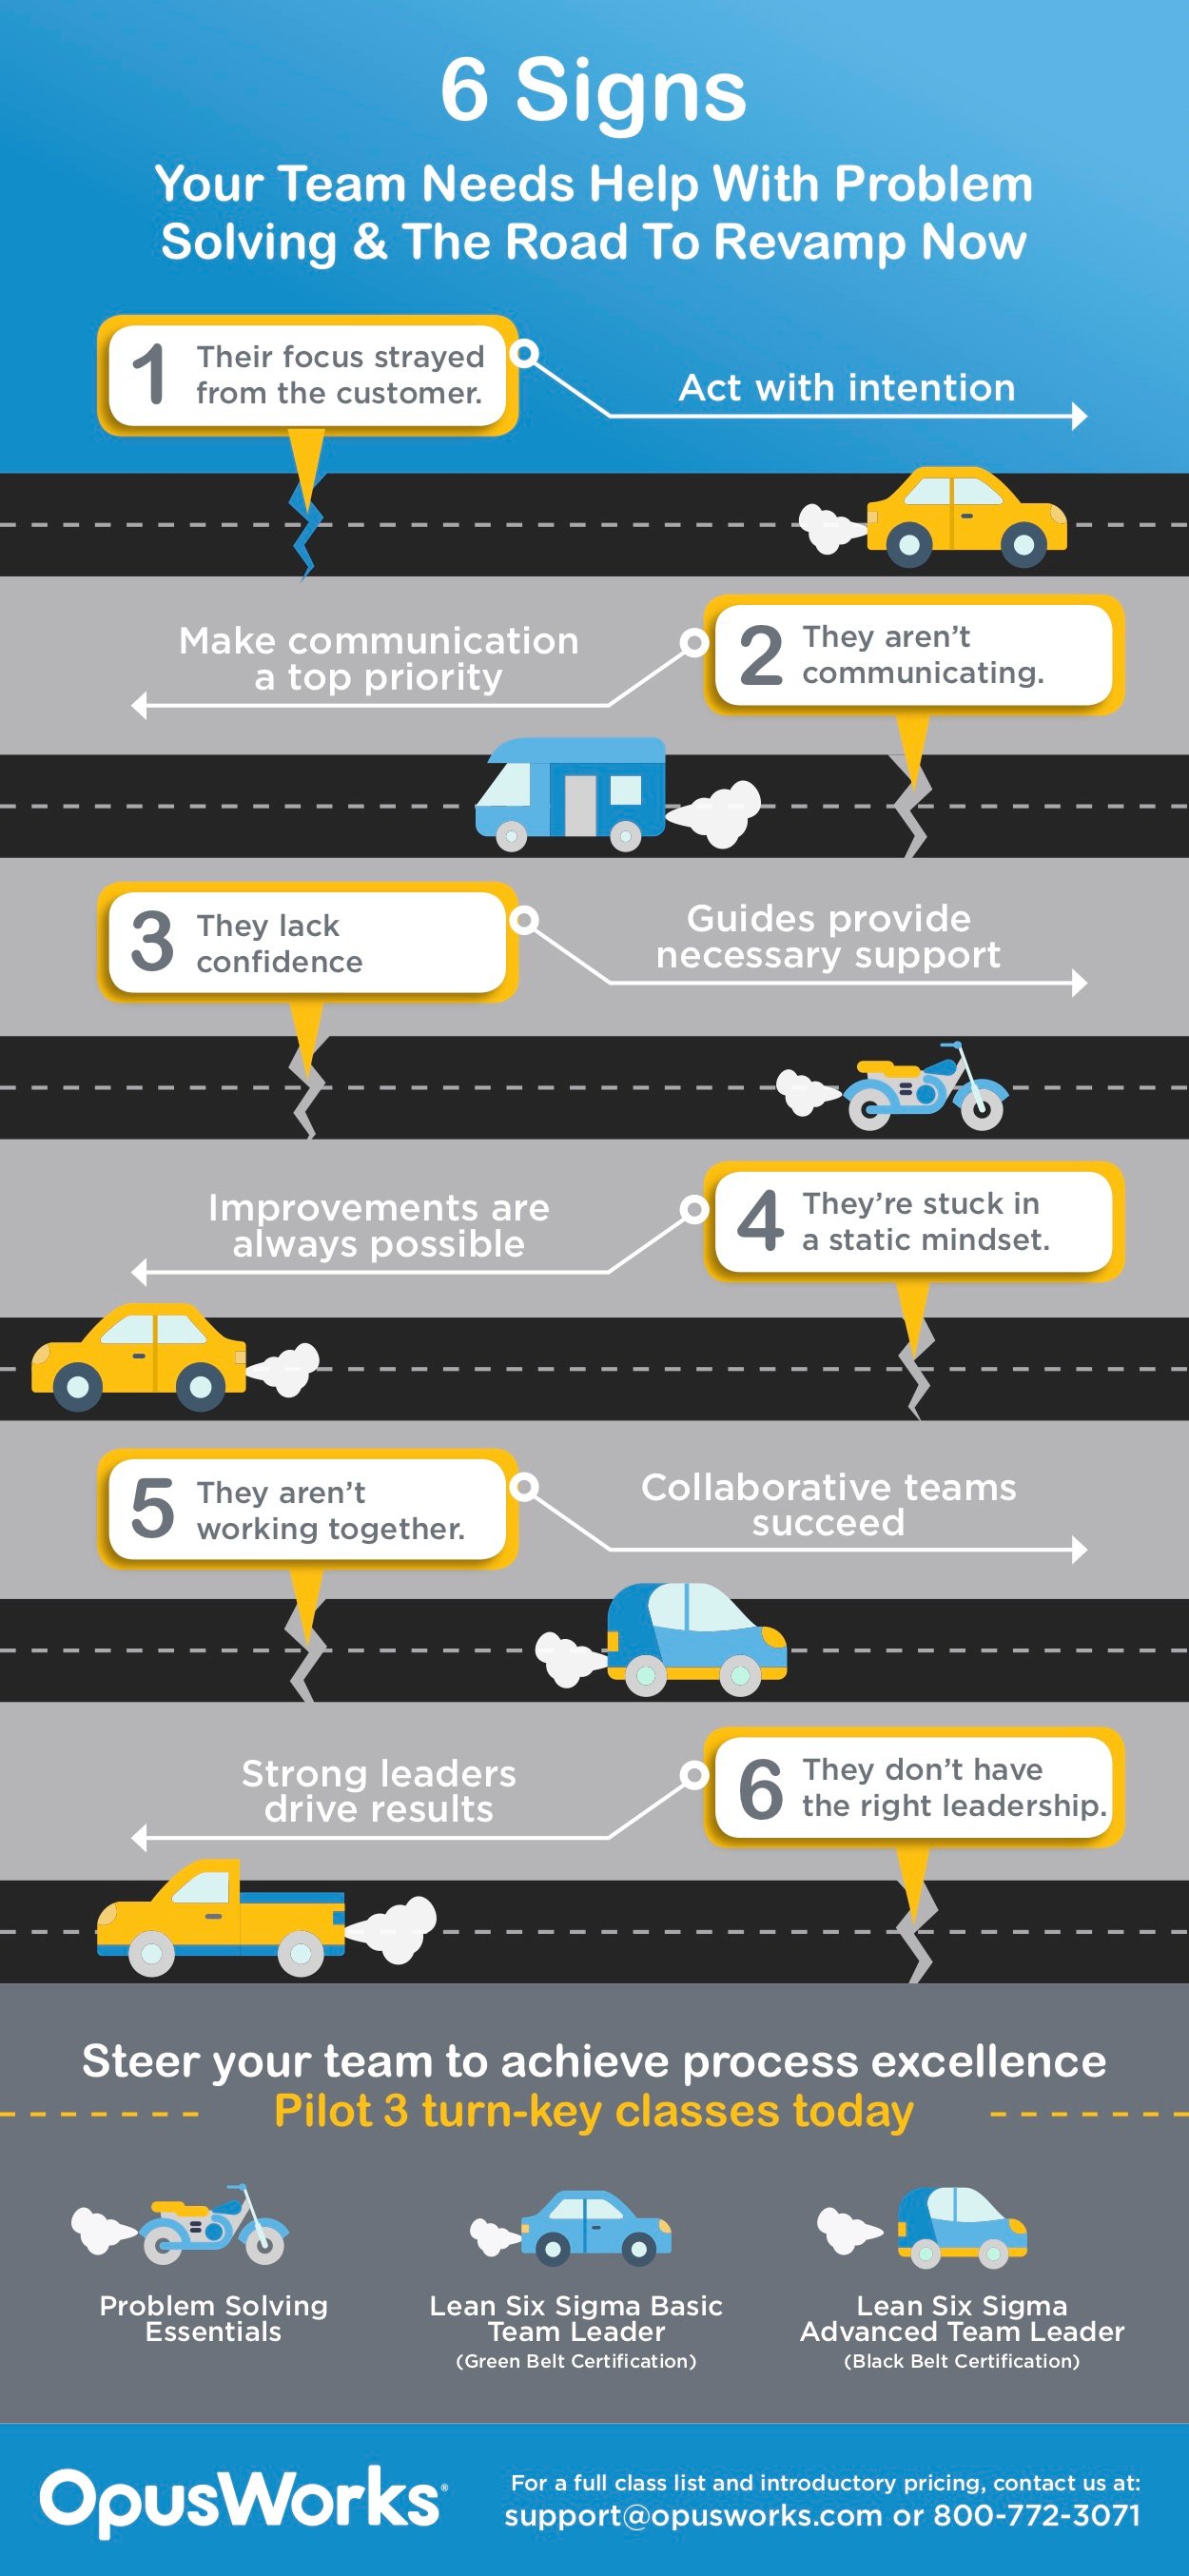 6 Signs Your Team Needs Help with Problemm Solving and the Road to Revamp now 1.Their focus strayed from the customer - act with intention